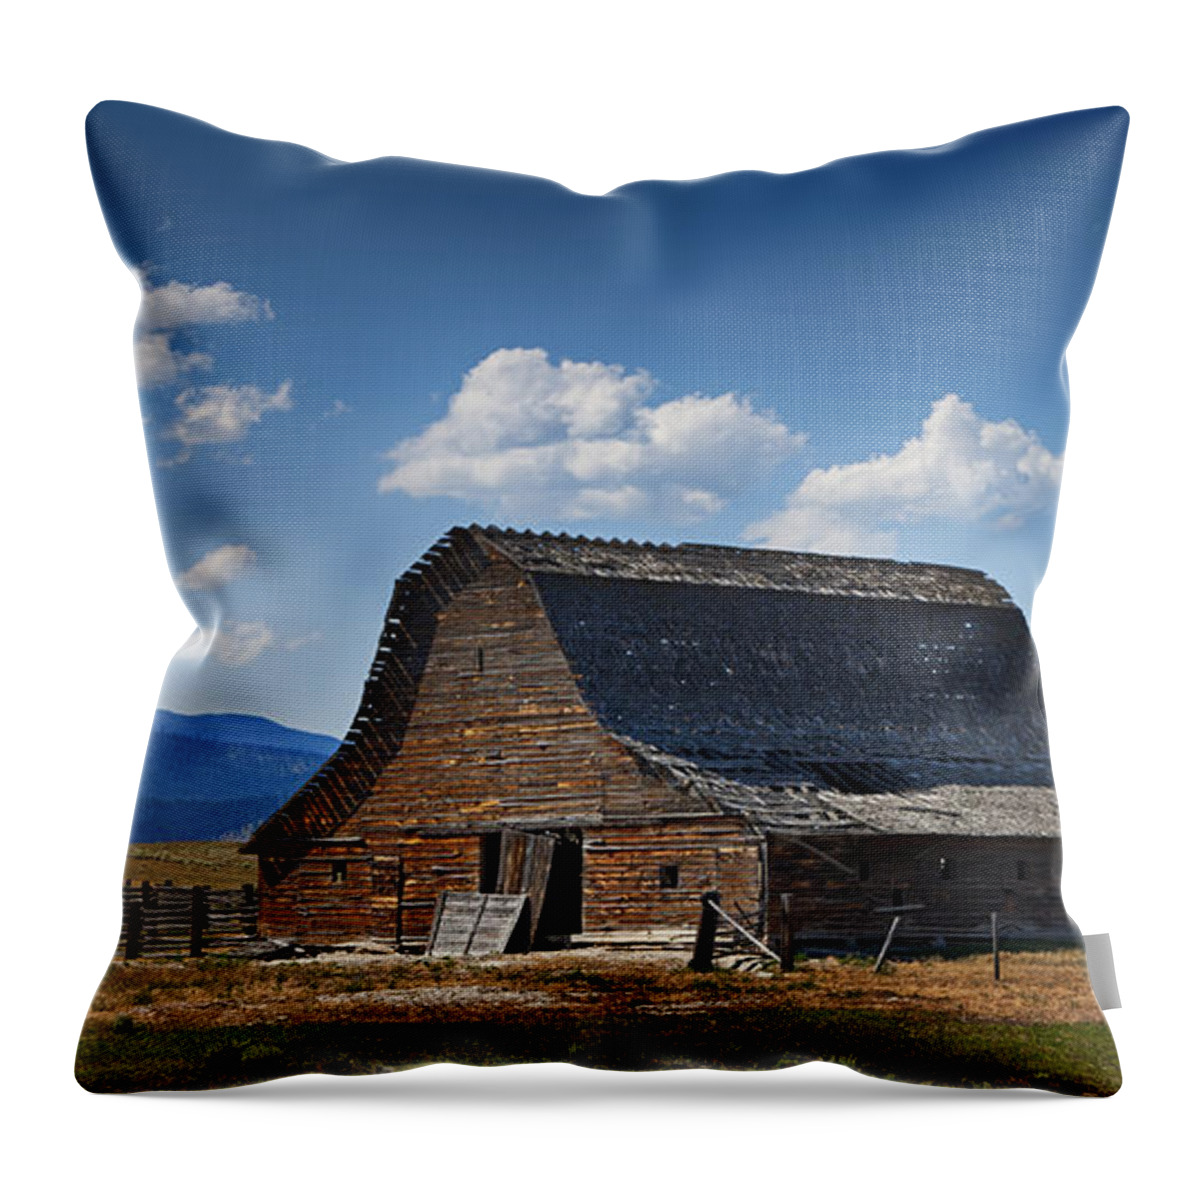 Buildings Throw Pillow featuring the photograph Bygone Days Barn by Mary Jo Allen